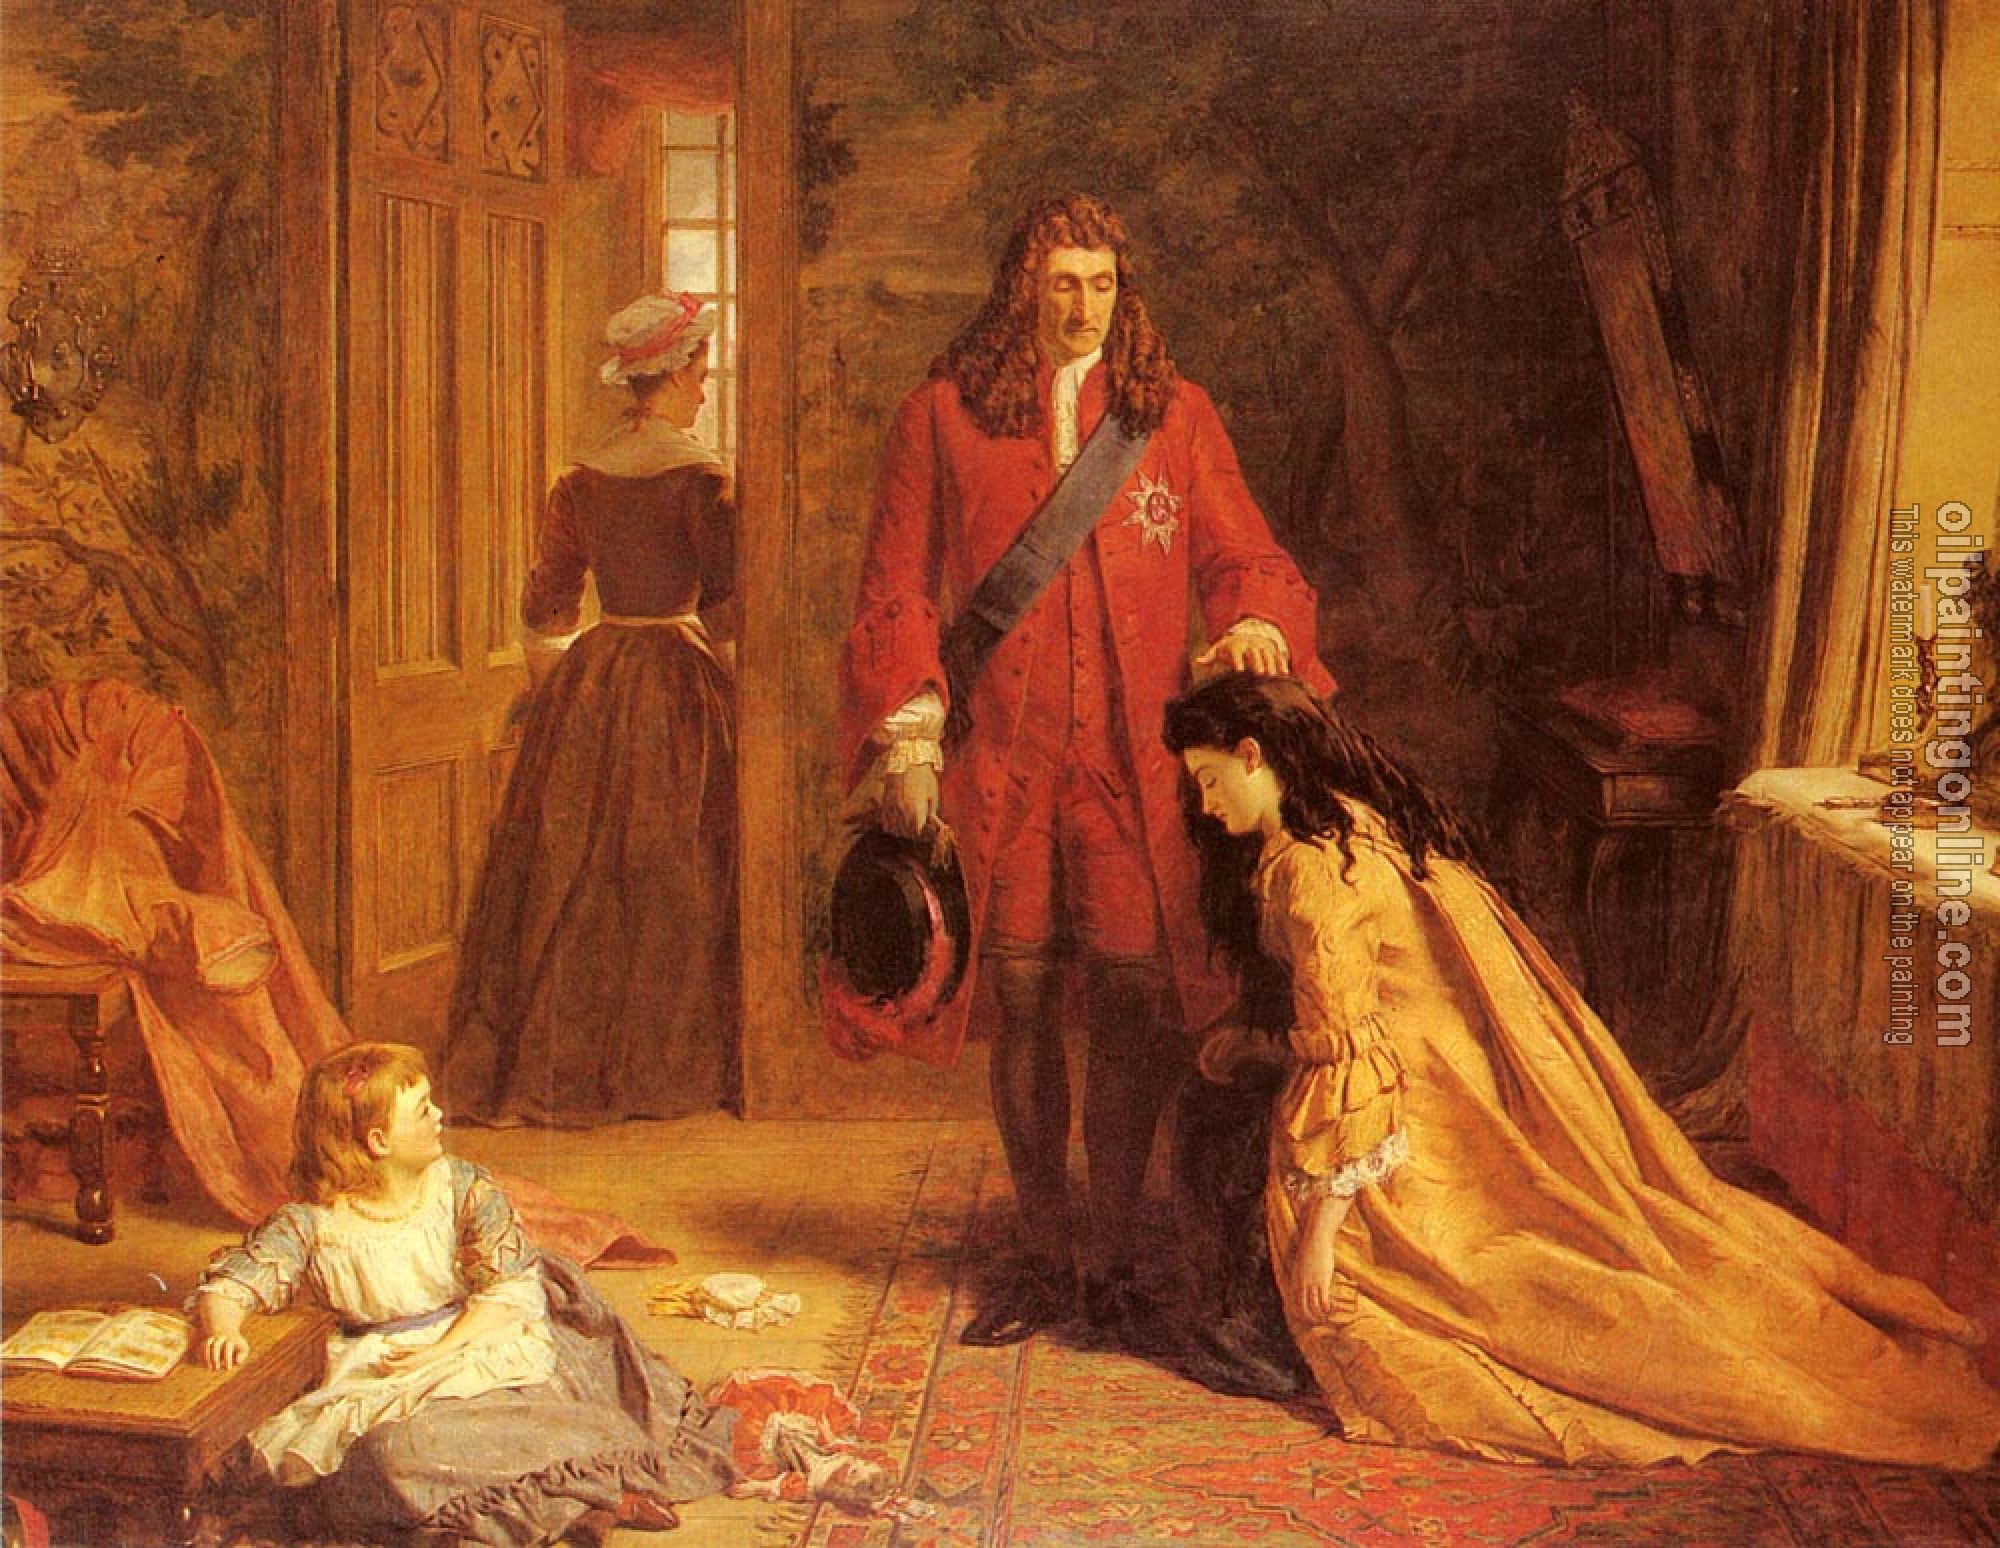 William Powell Frith - An Incident In The Life Of Mary Wortley Montague